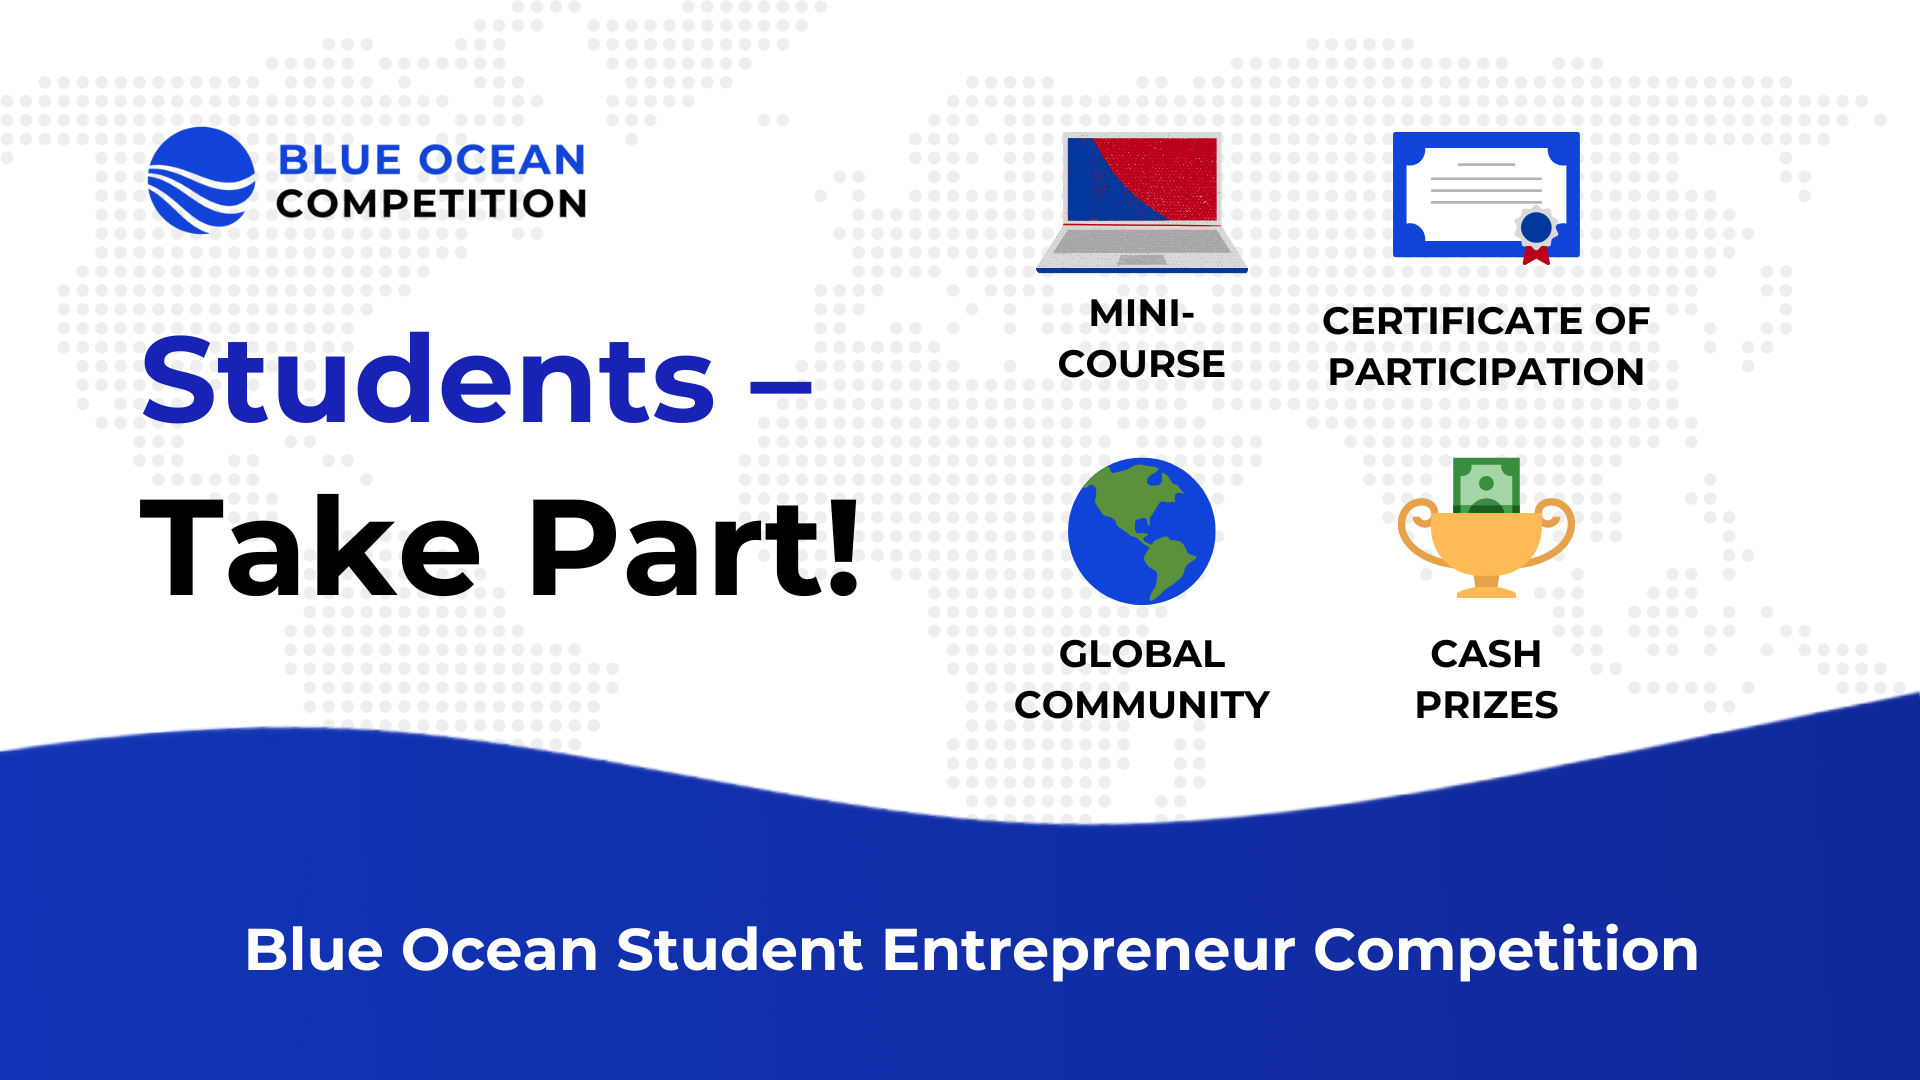 How to Compete in the Blue Ocean Student Competition